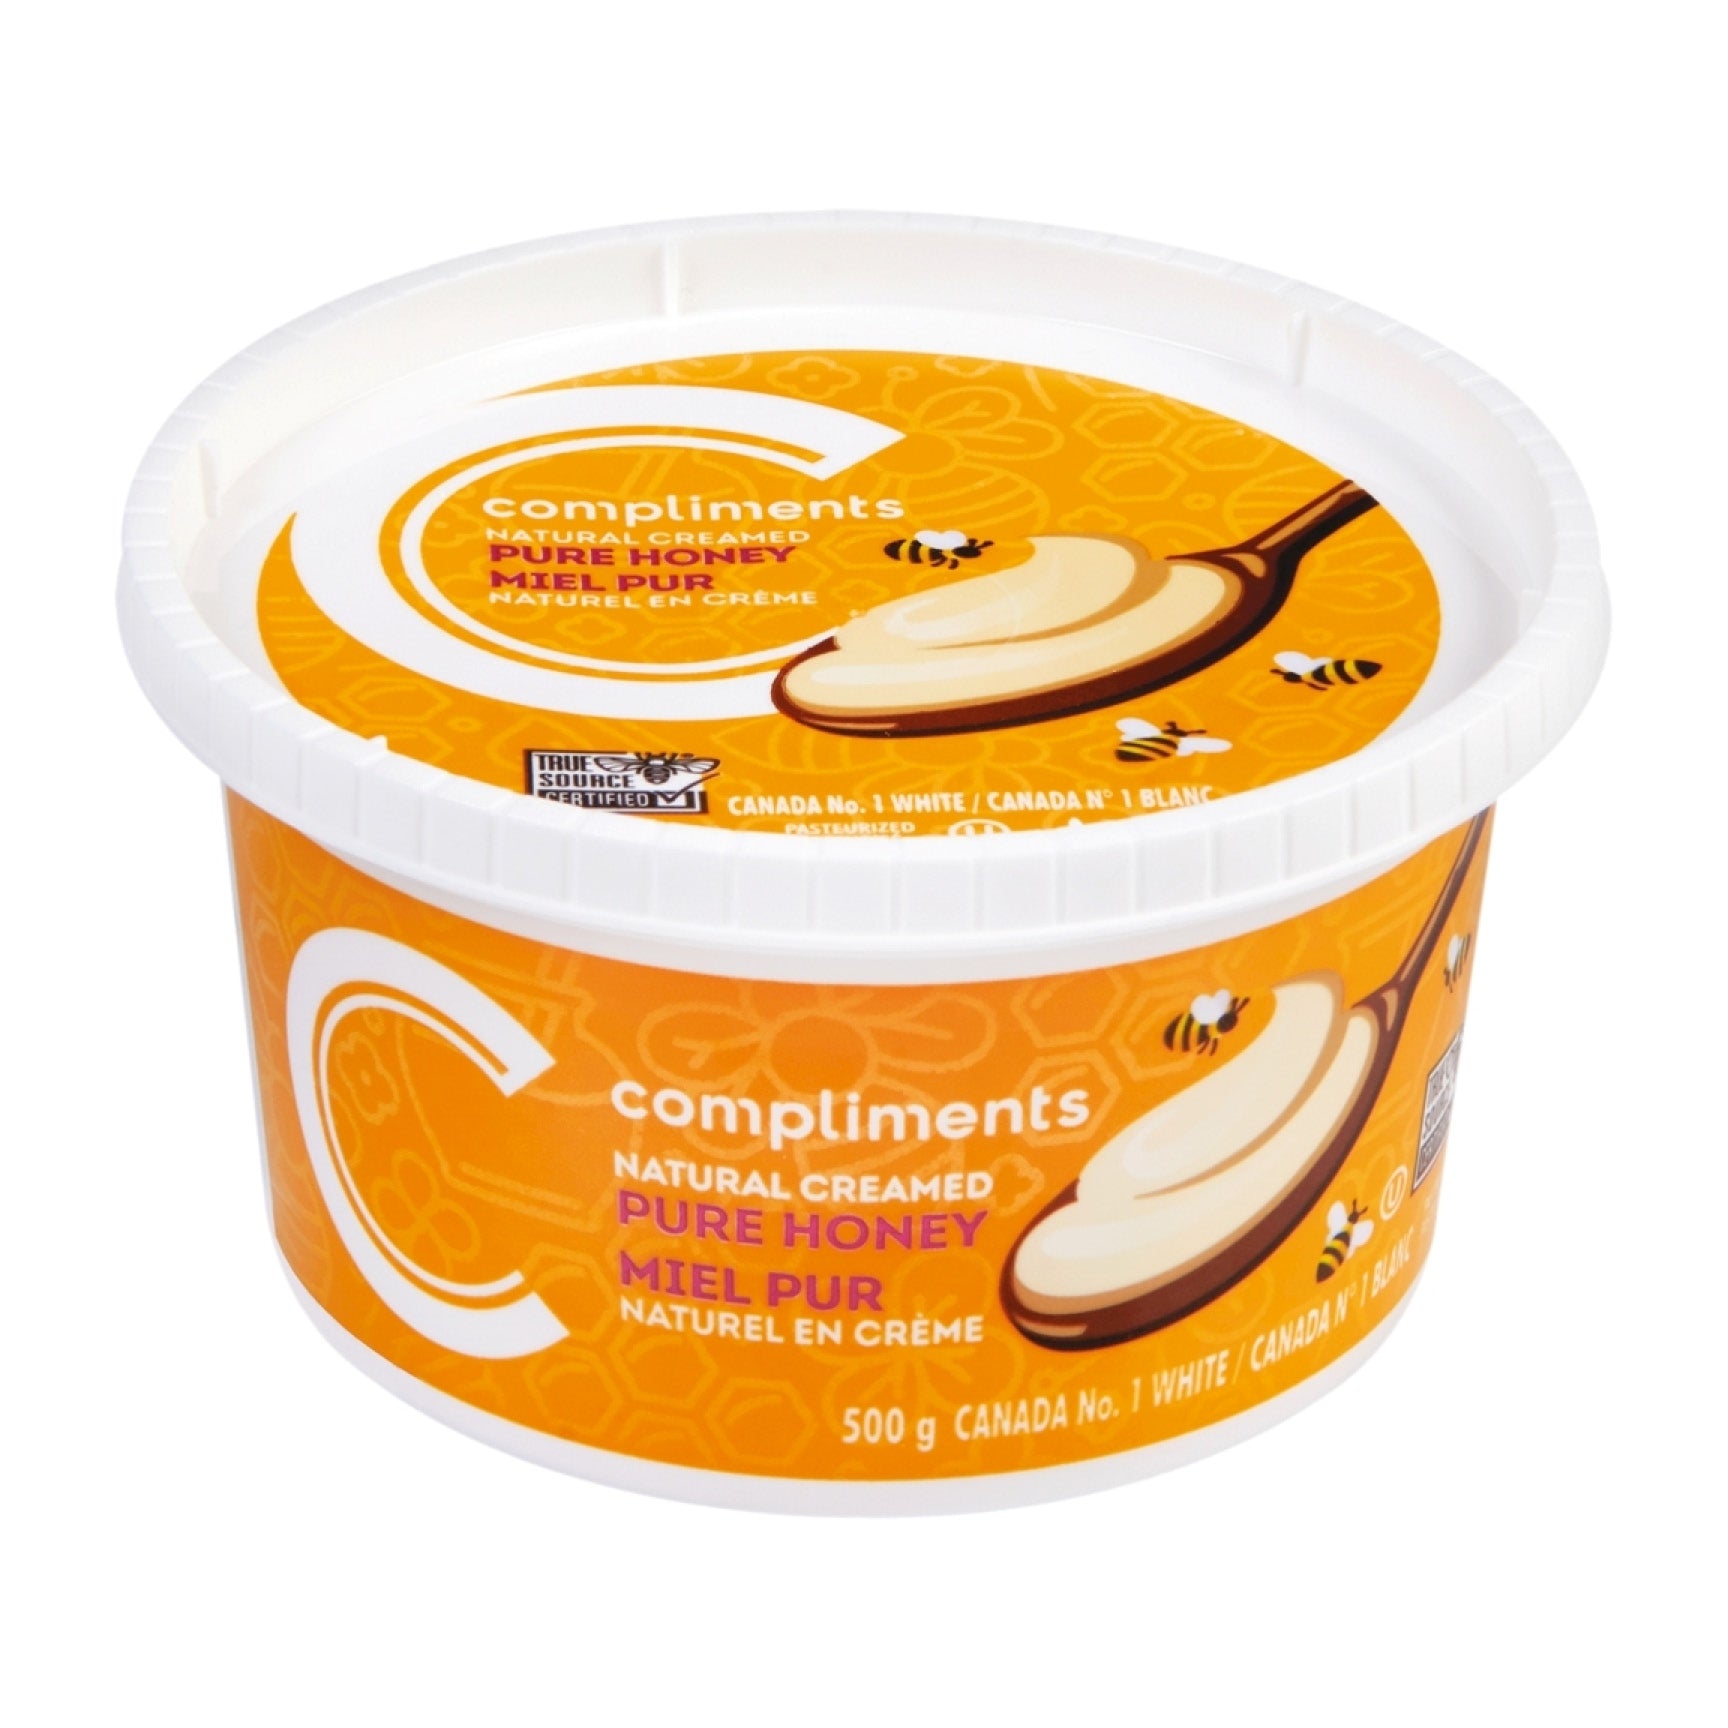 Compliments Honey, Pure Naturally Creamed, 500g